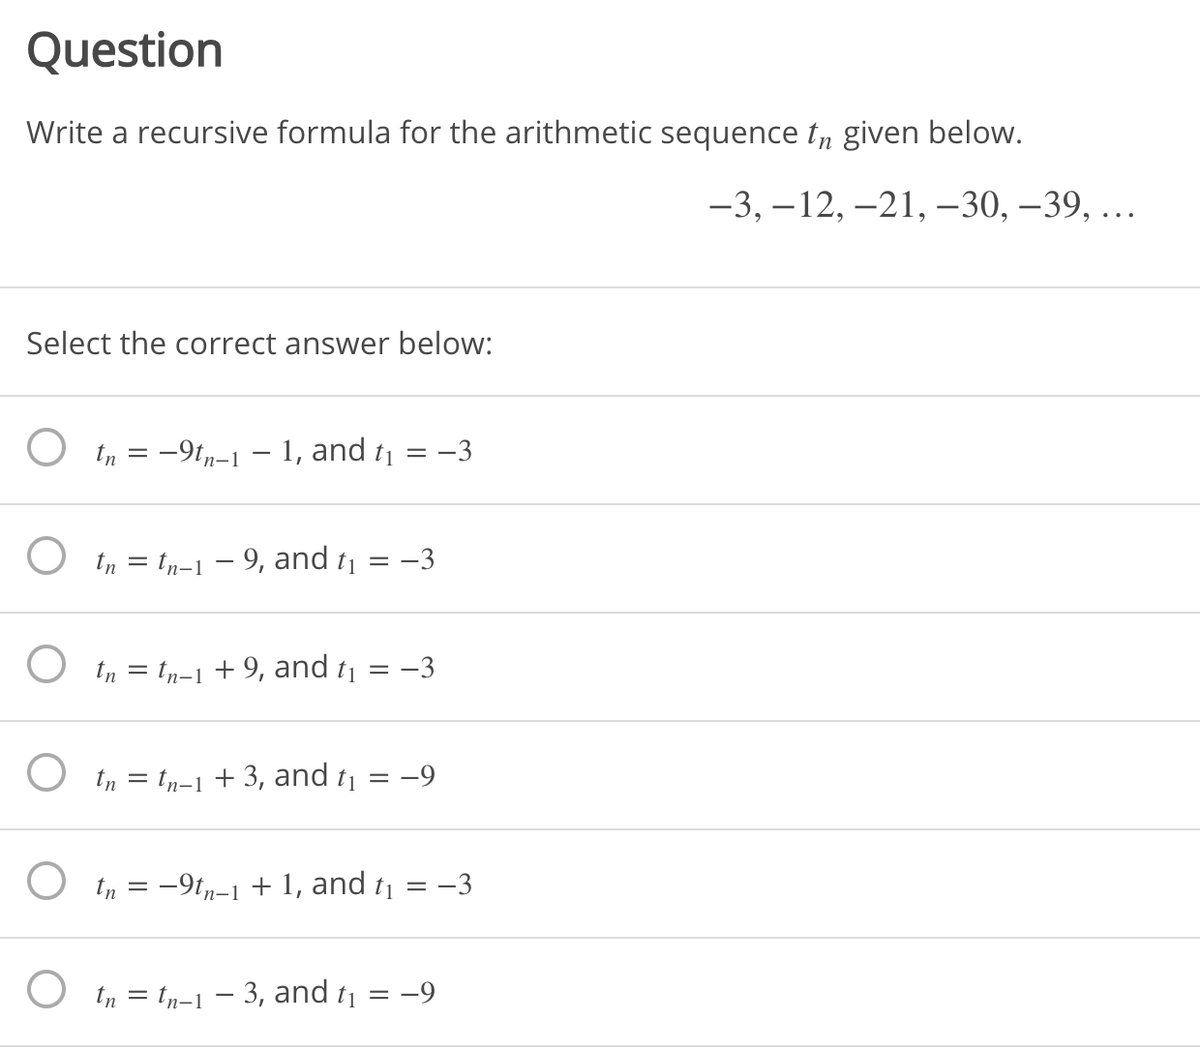 Question
Write a recursive formula for the arithmetic sequence t„ given below.
-3, –12, -21, -30, –39, ..
Select the correct answer below:
O tn = -9tn-1 – 1, and t1 = –3
O tn = tn-1 - 9, and t1
-3
O tn = tn-1 + 9, and t1
-3
O tn = tn-1 + 3, and tj
:-9
O tn = -9t,-1 + 1, and t1
= -3
O in = tp-1 – 3, and t¡ = -9
